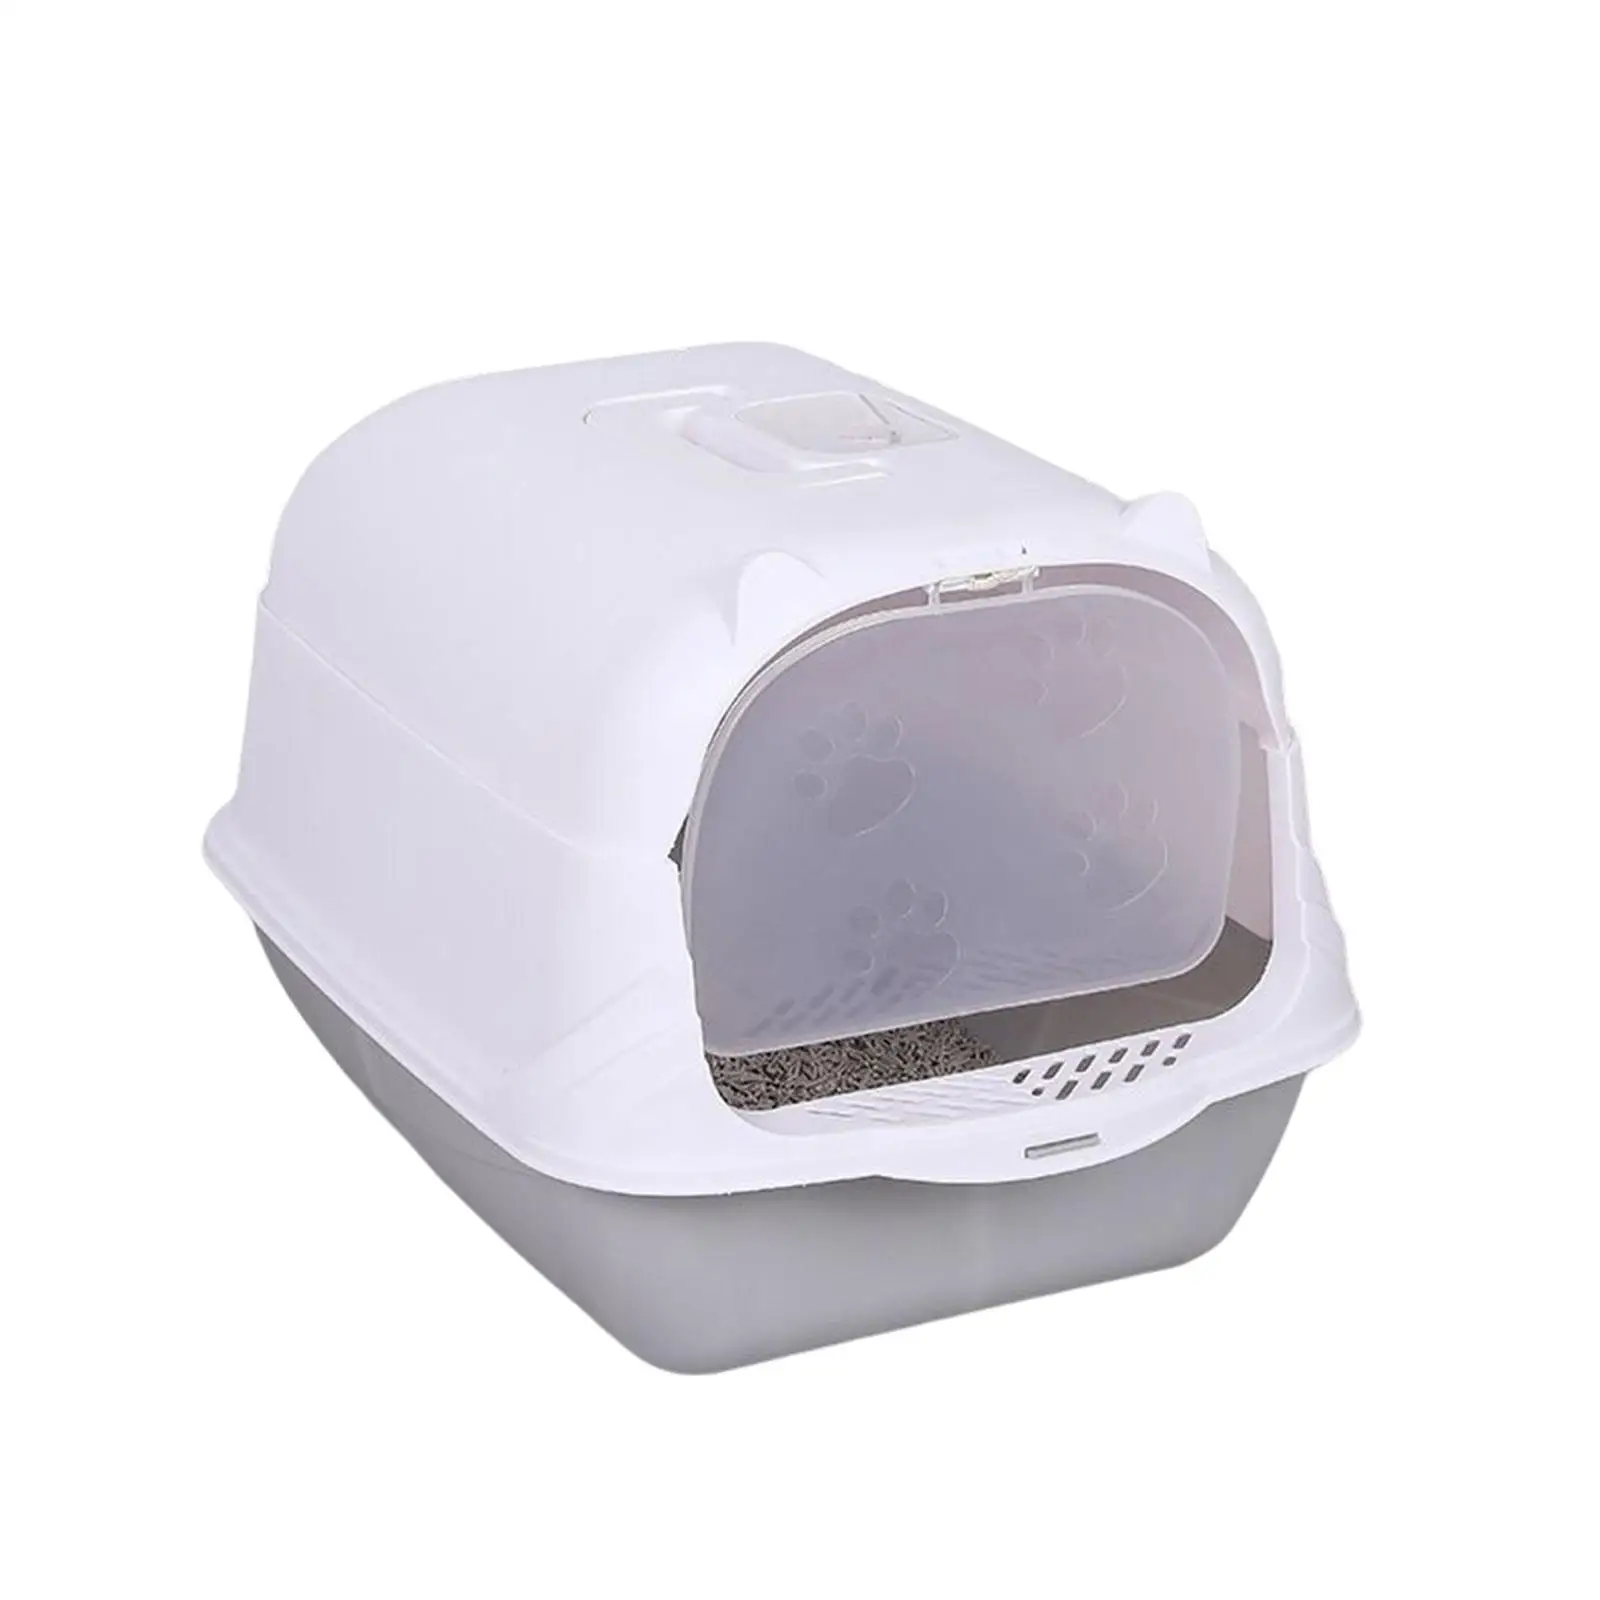 High Sided Hooded Cat Box Closed Litter Pan Bedpan with Gate Spoon Deep Loupet